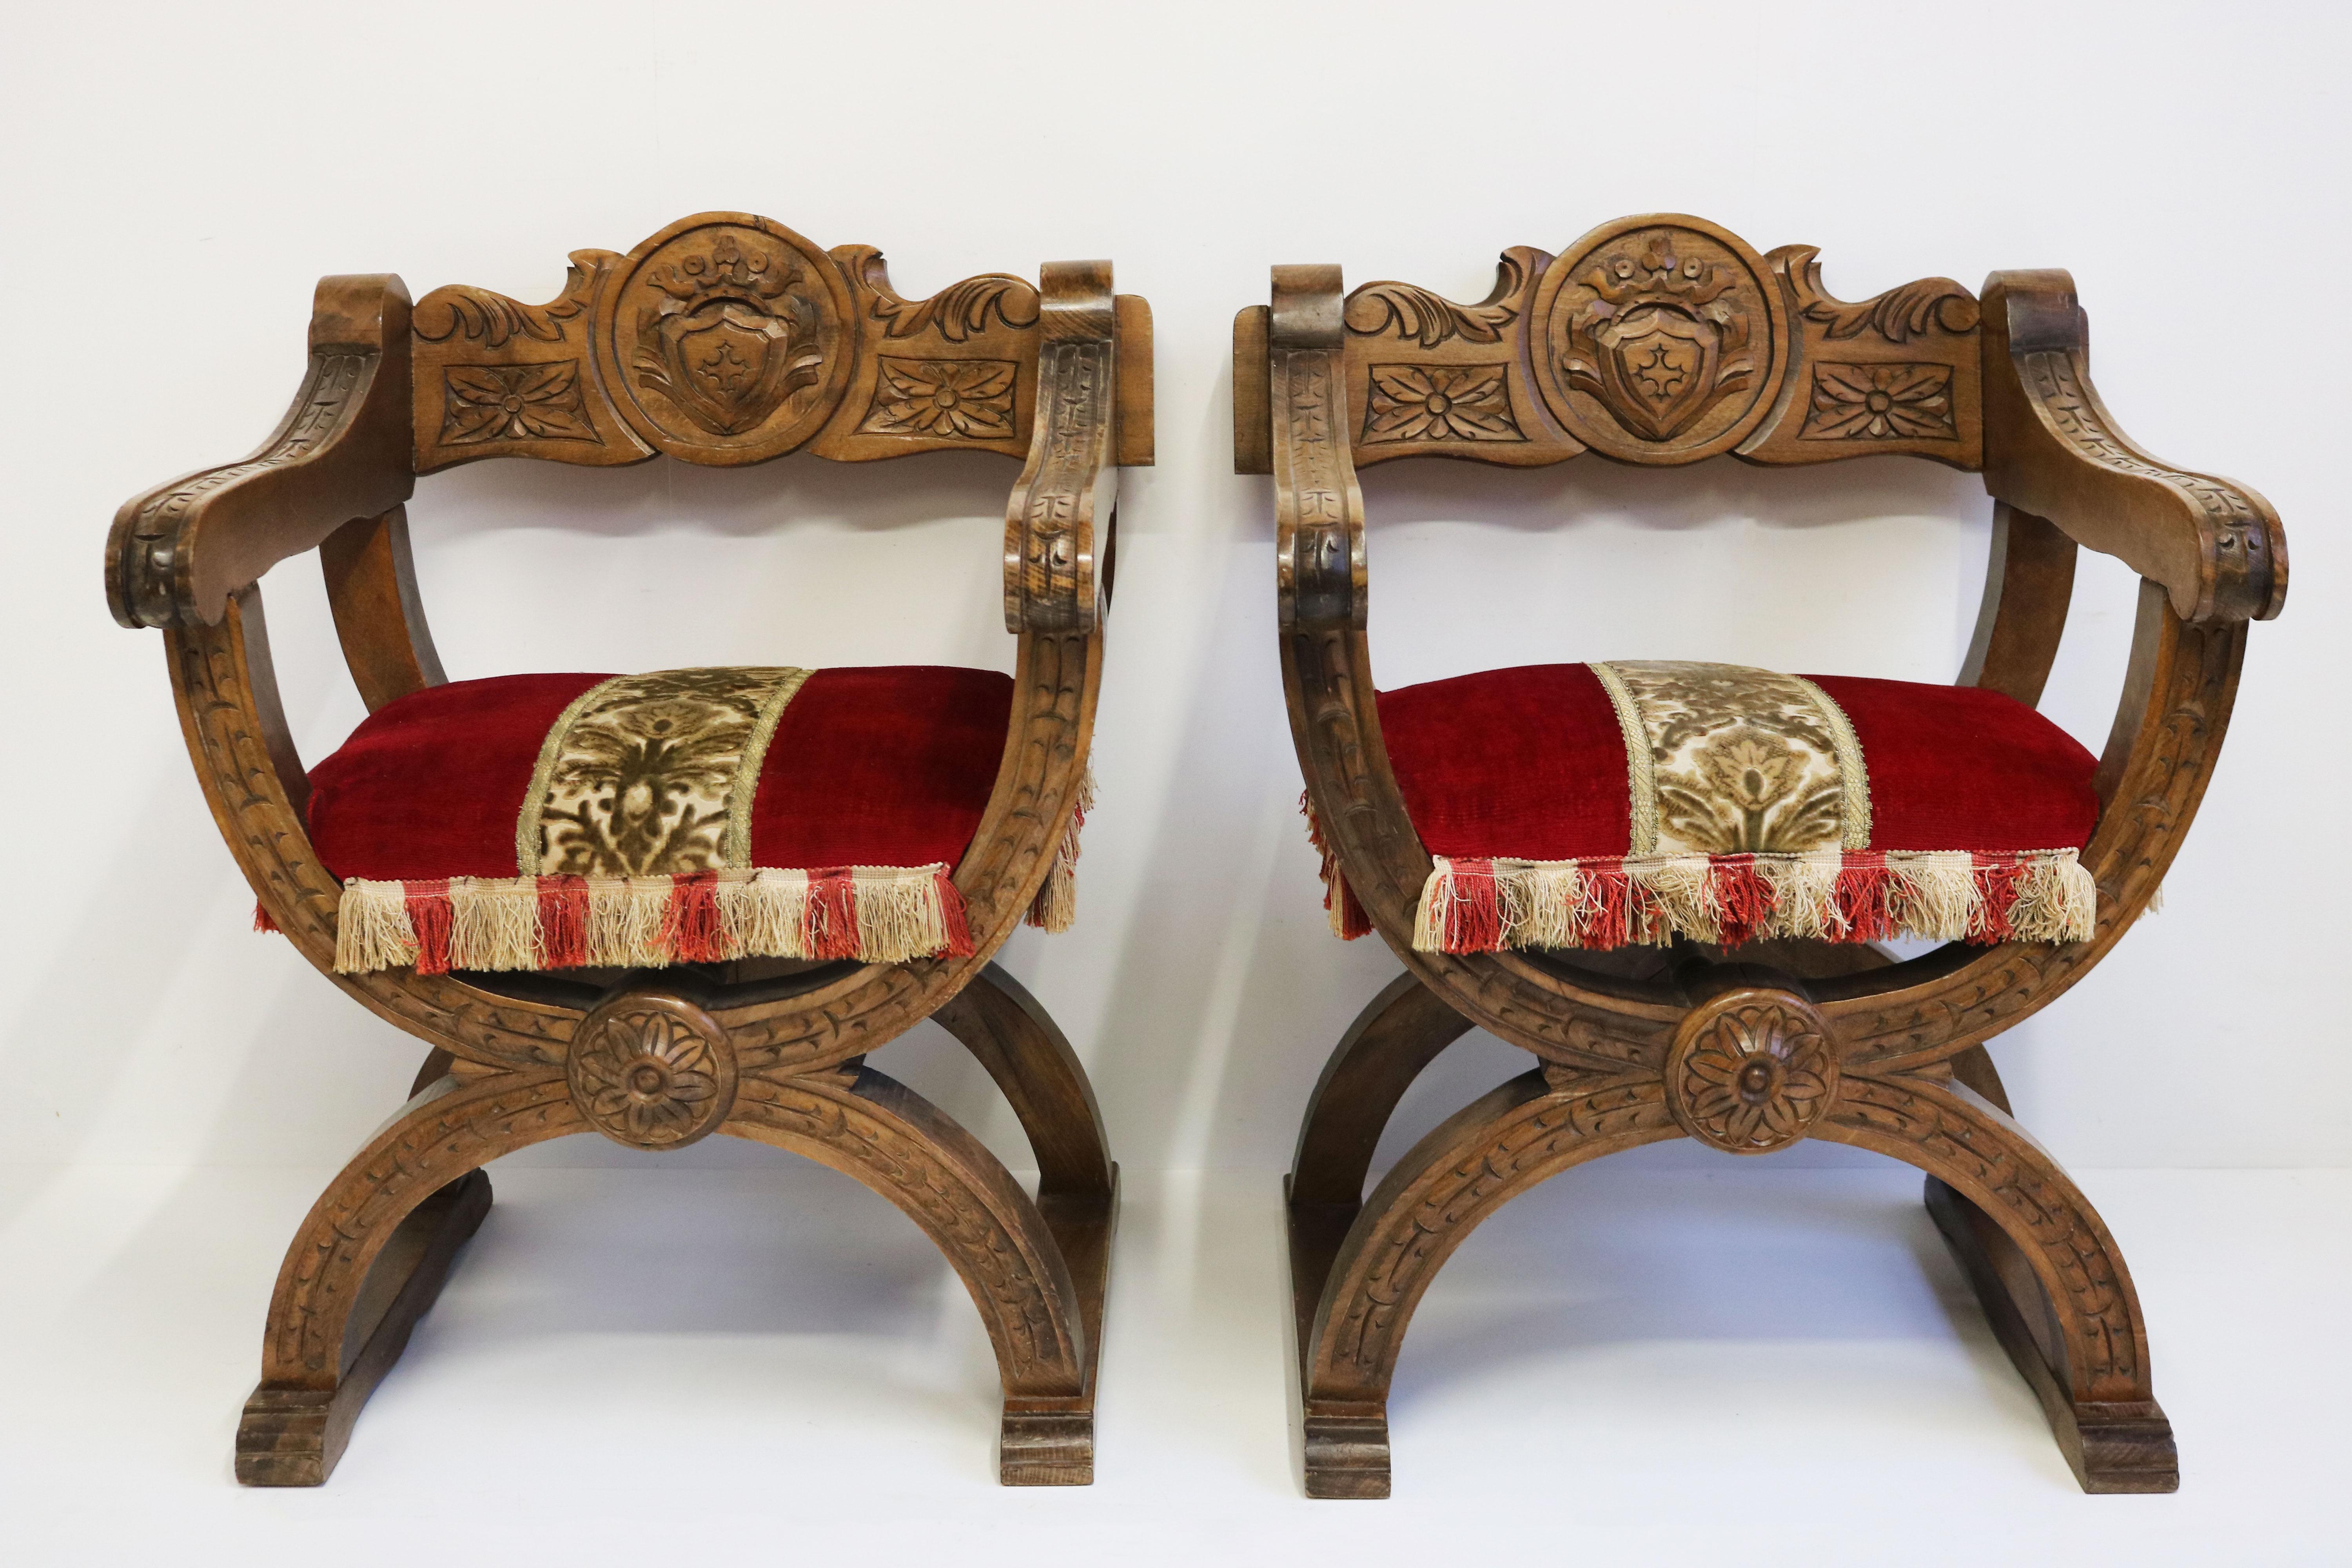 Impressive pair of X frame throne / castle chairs in Spanish Medieval design style made in the 1930s. 
Solid oak frames with marvelous carved details , for example the knights emblem on the backrest.
Marvelous upholstery in red velvet with gold &